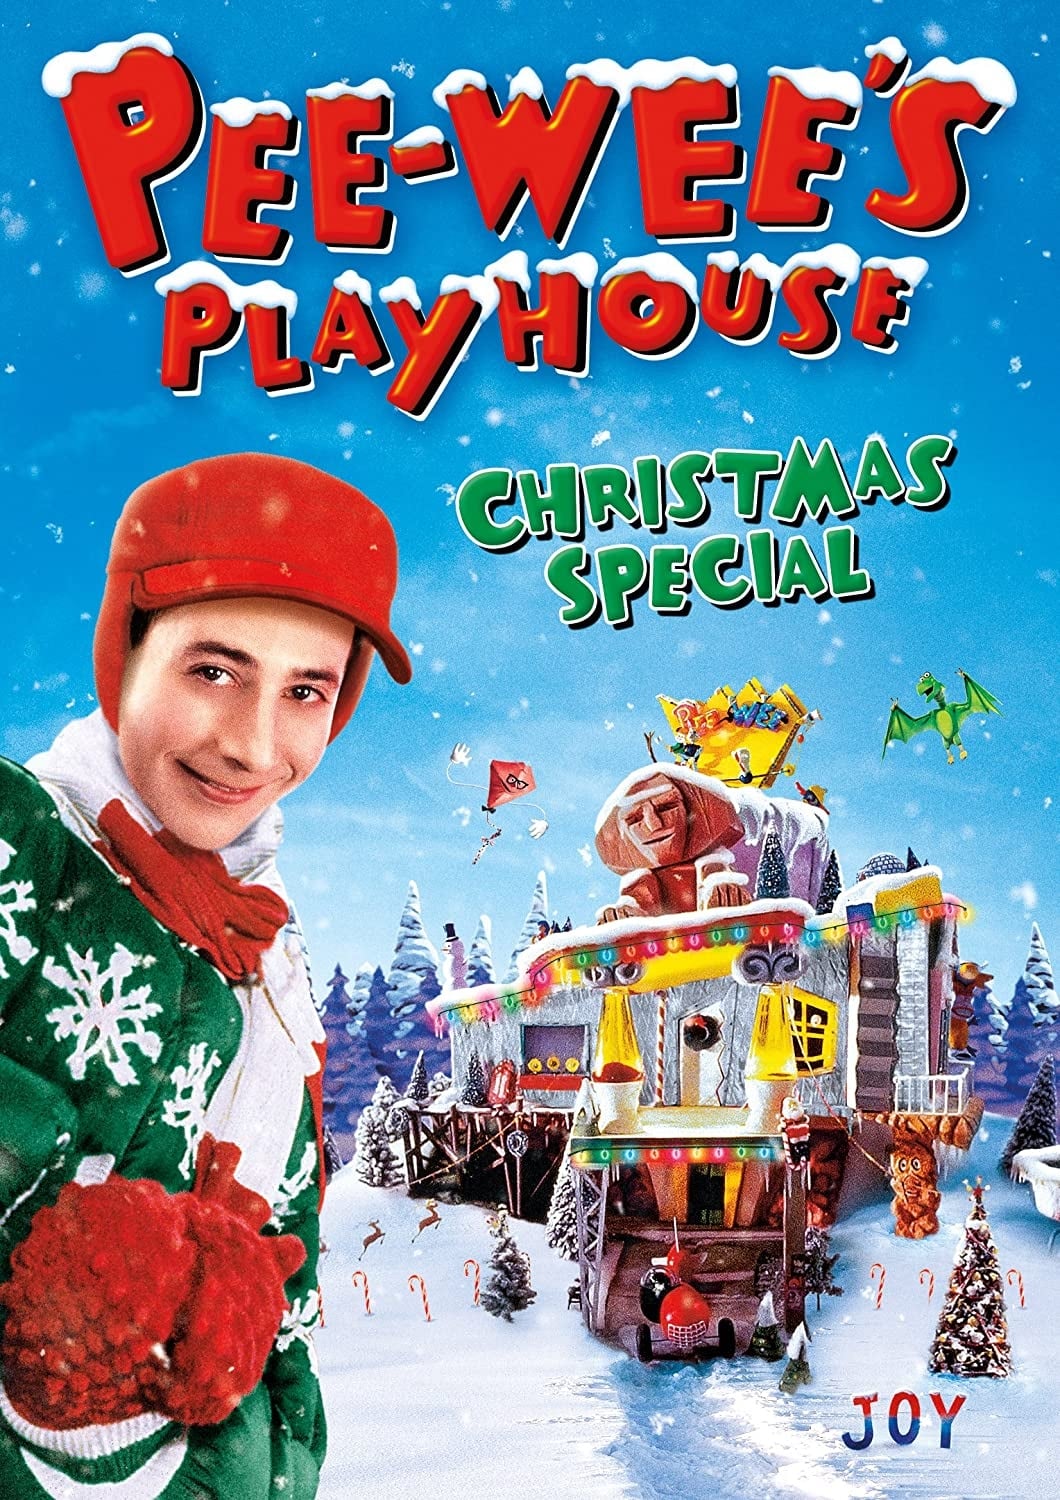 Pee-wees Playhouse Christmas Special